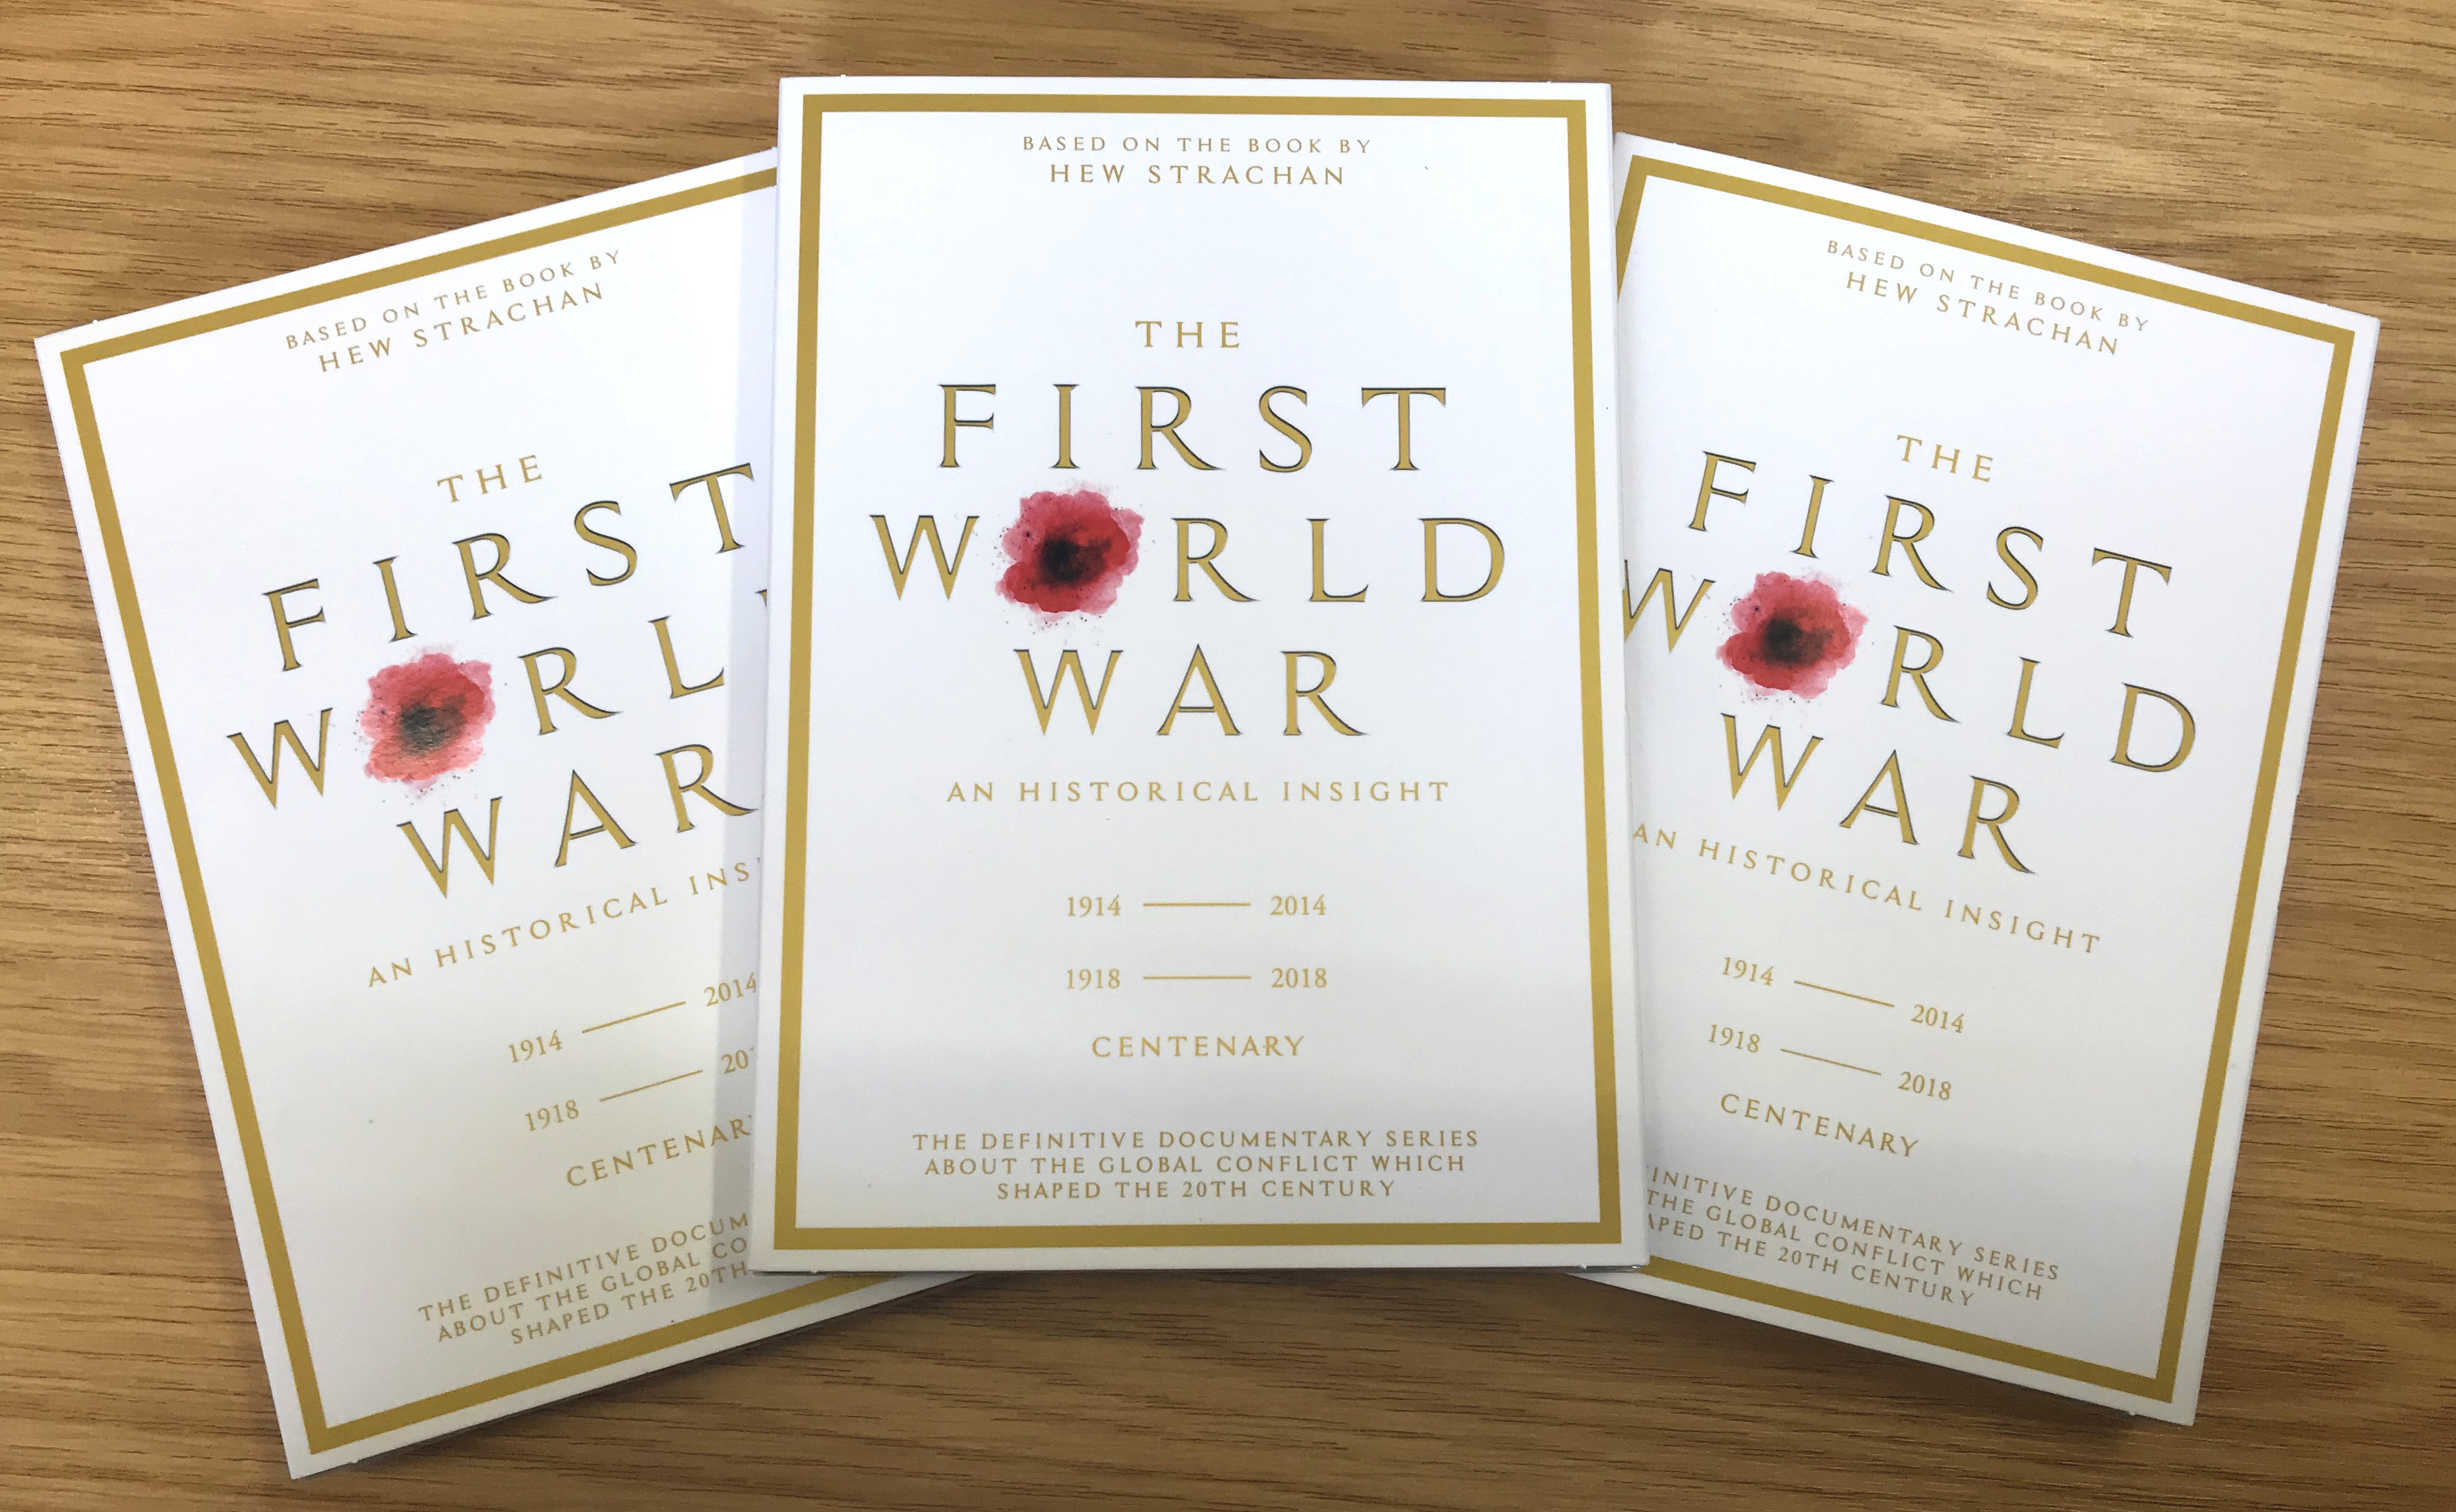 Win a copy of The First World War on DVD